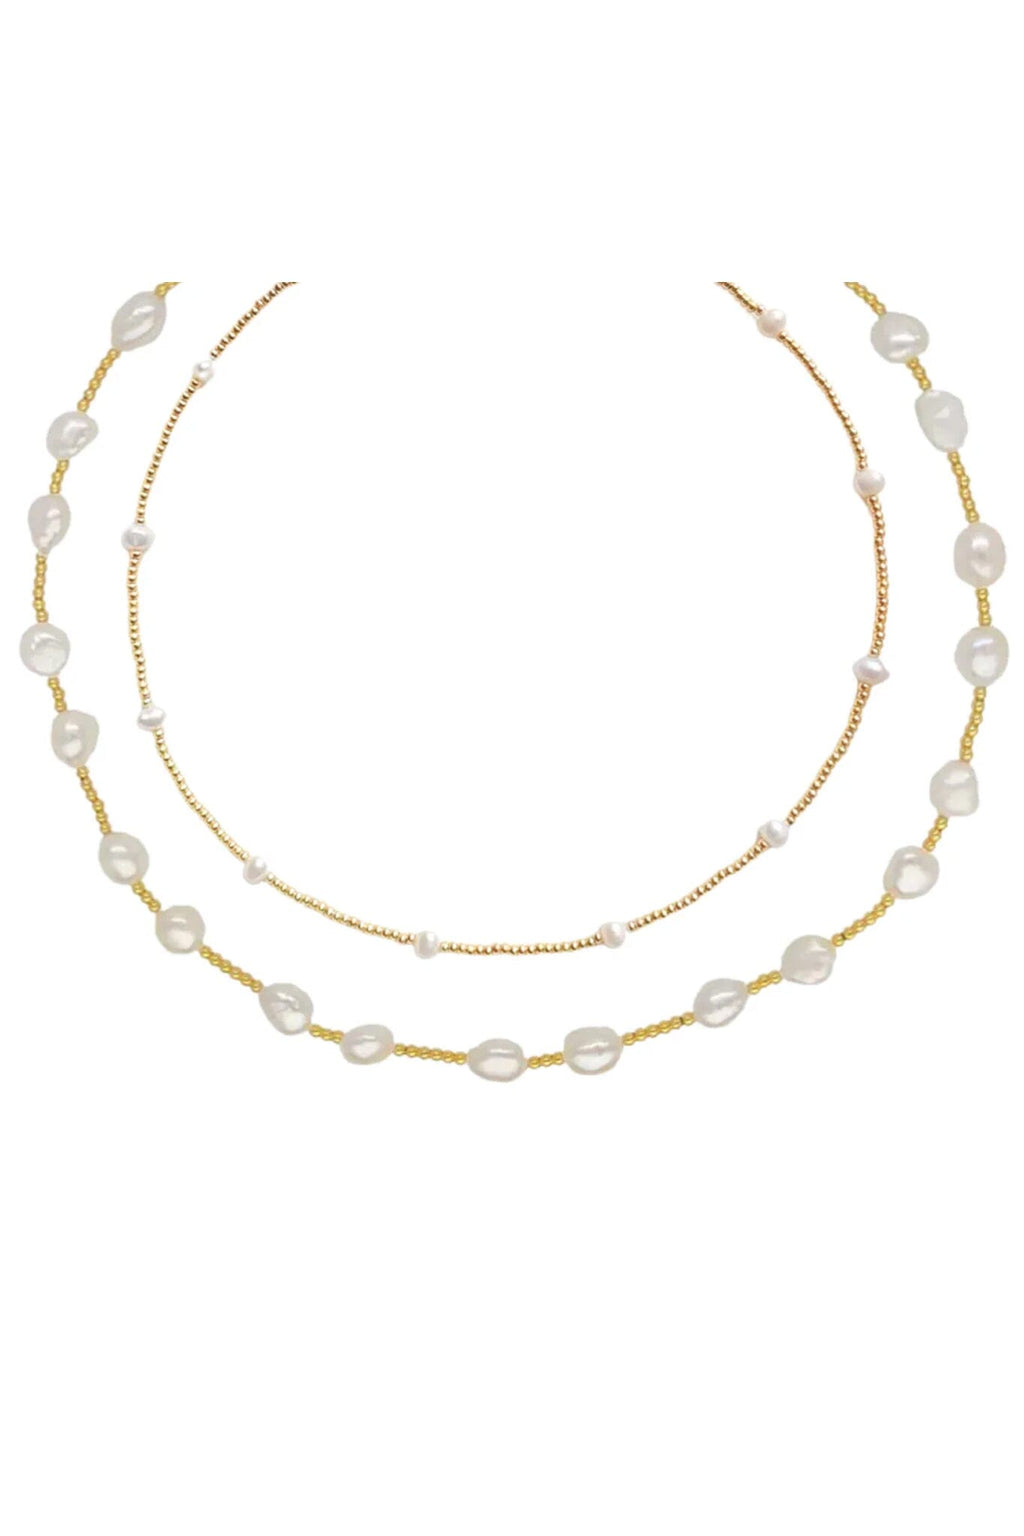 LIVIE | Pearly Girly Necklace Set